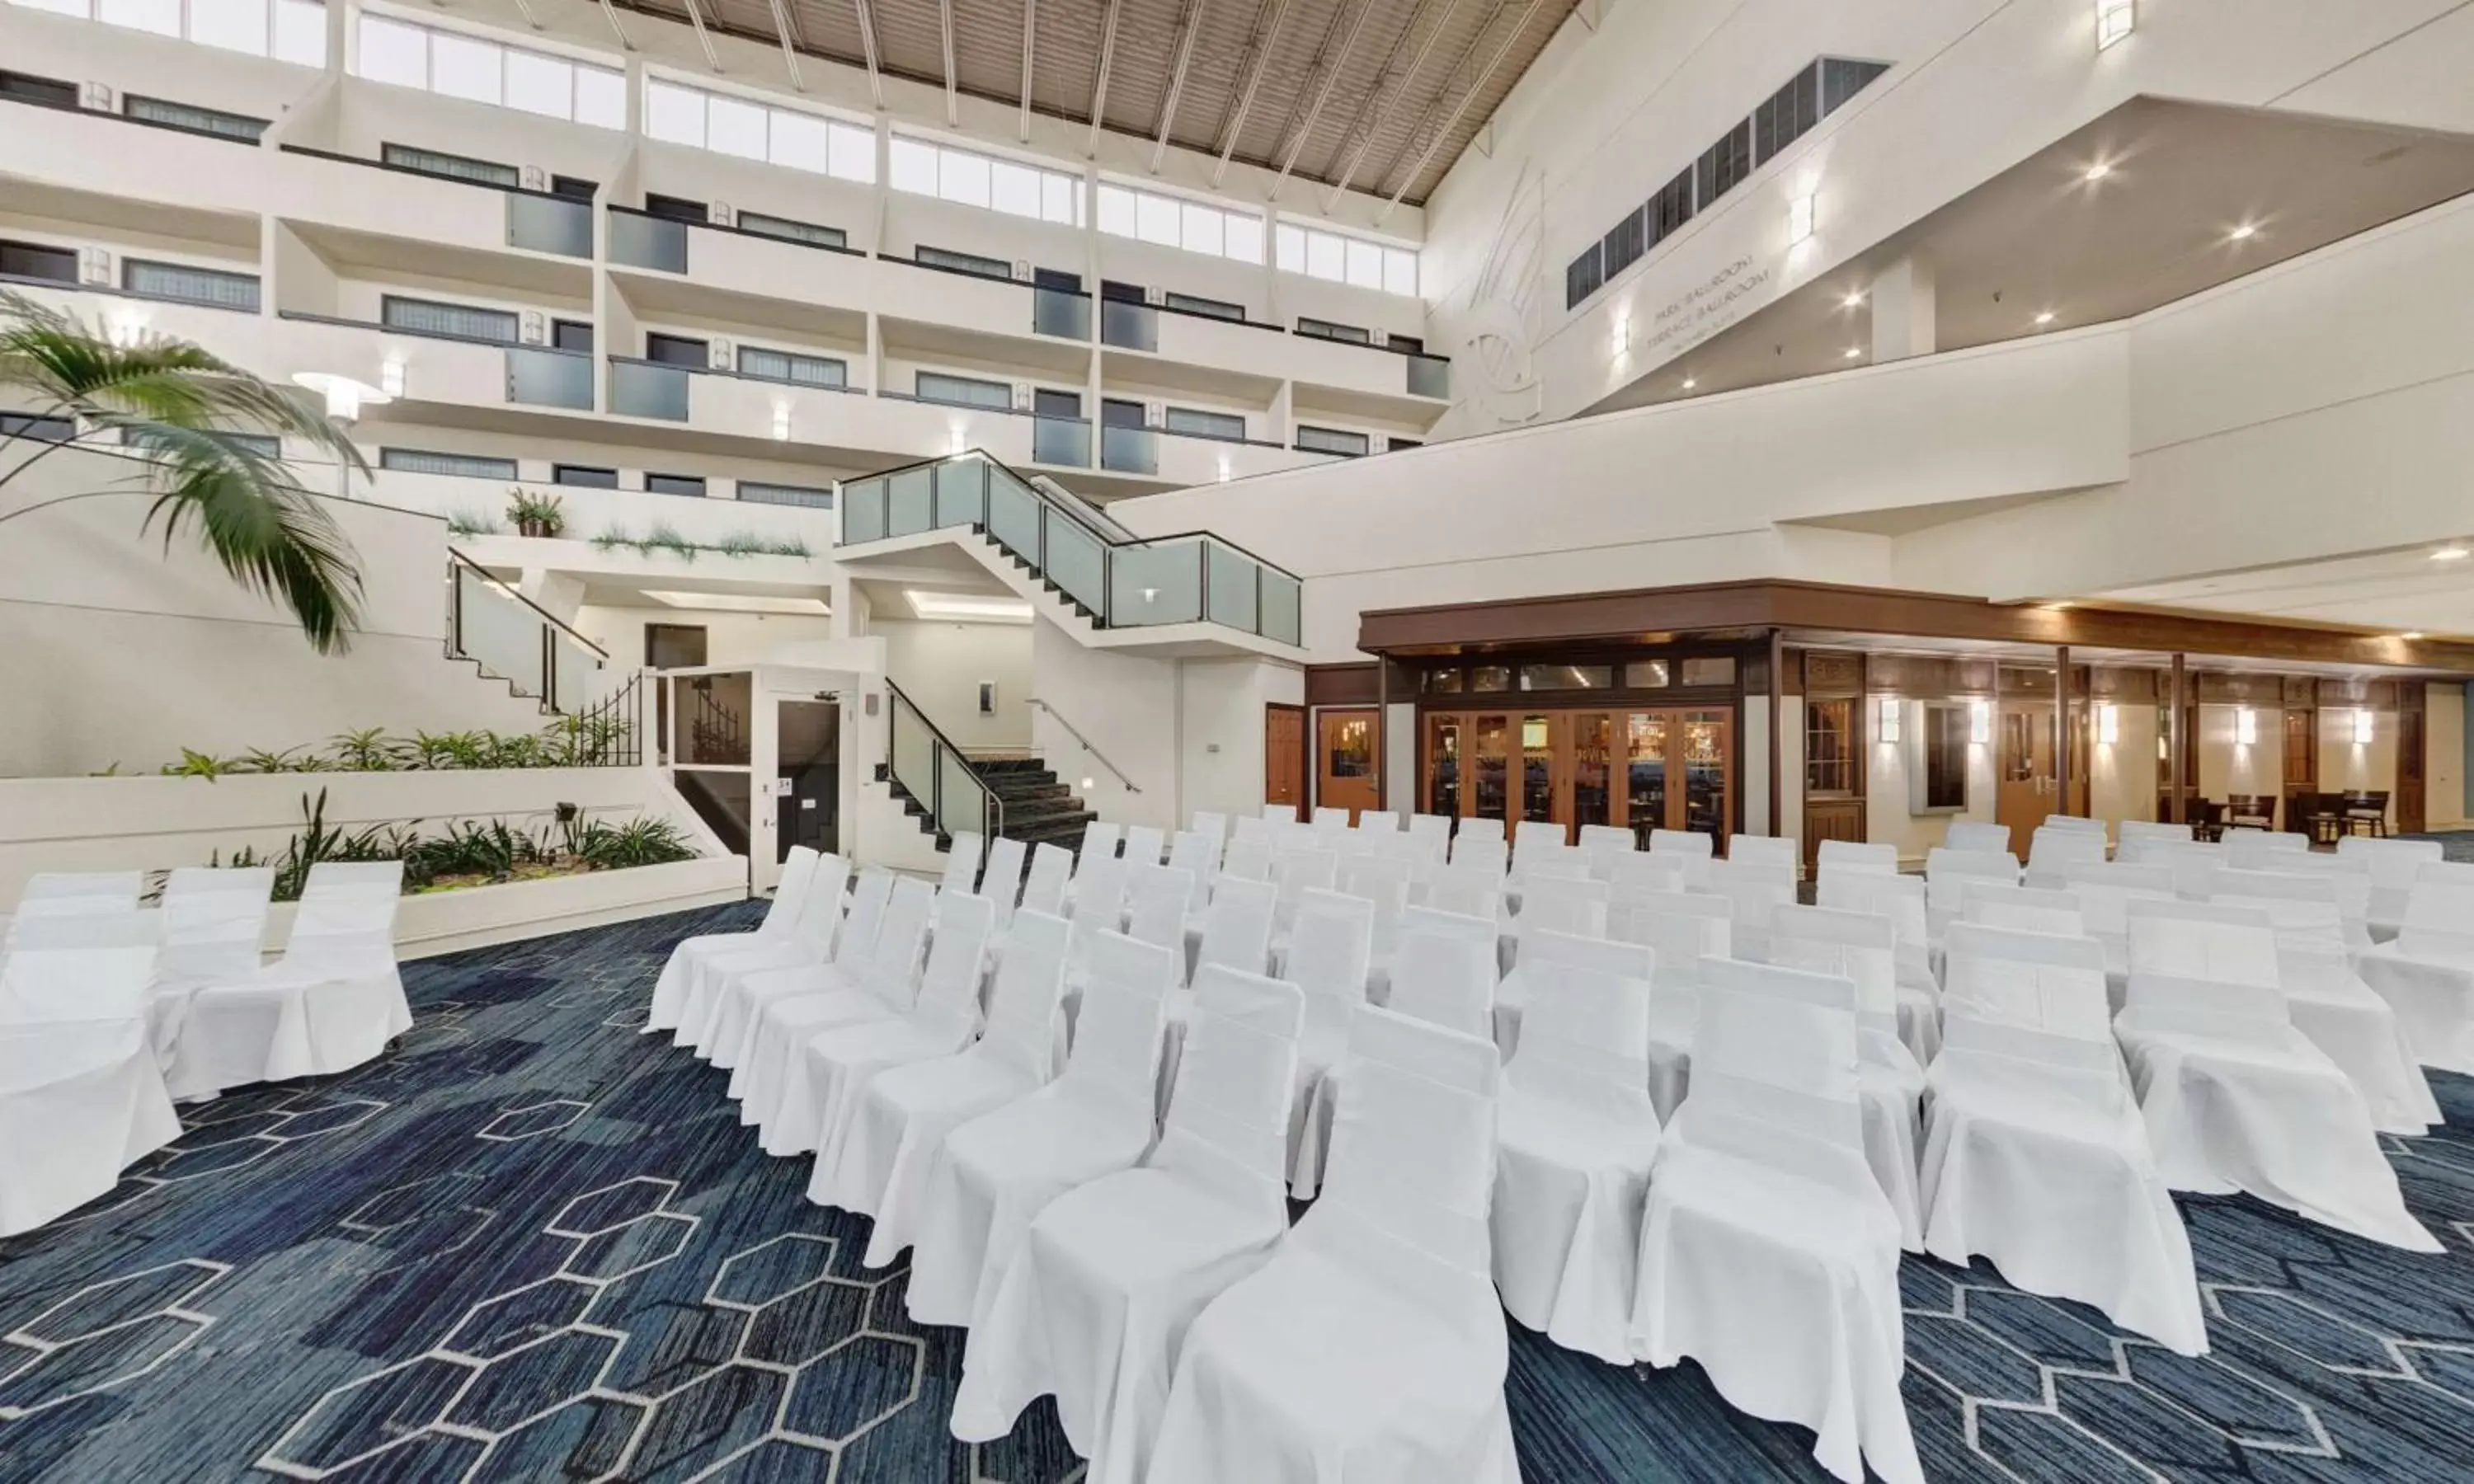 Meeting/conference room, Banquet Facilities in DoubleTree by Hilton Minneapolis Park Place